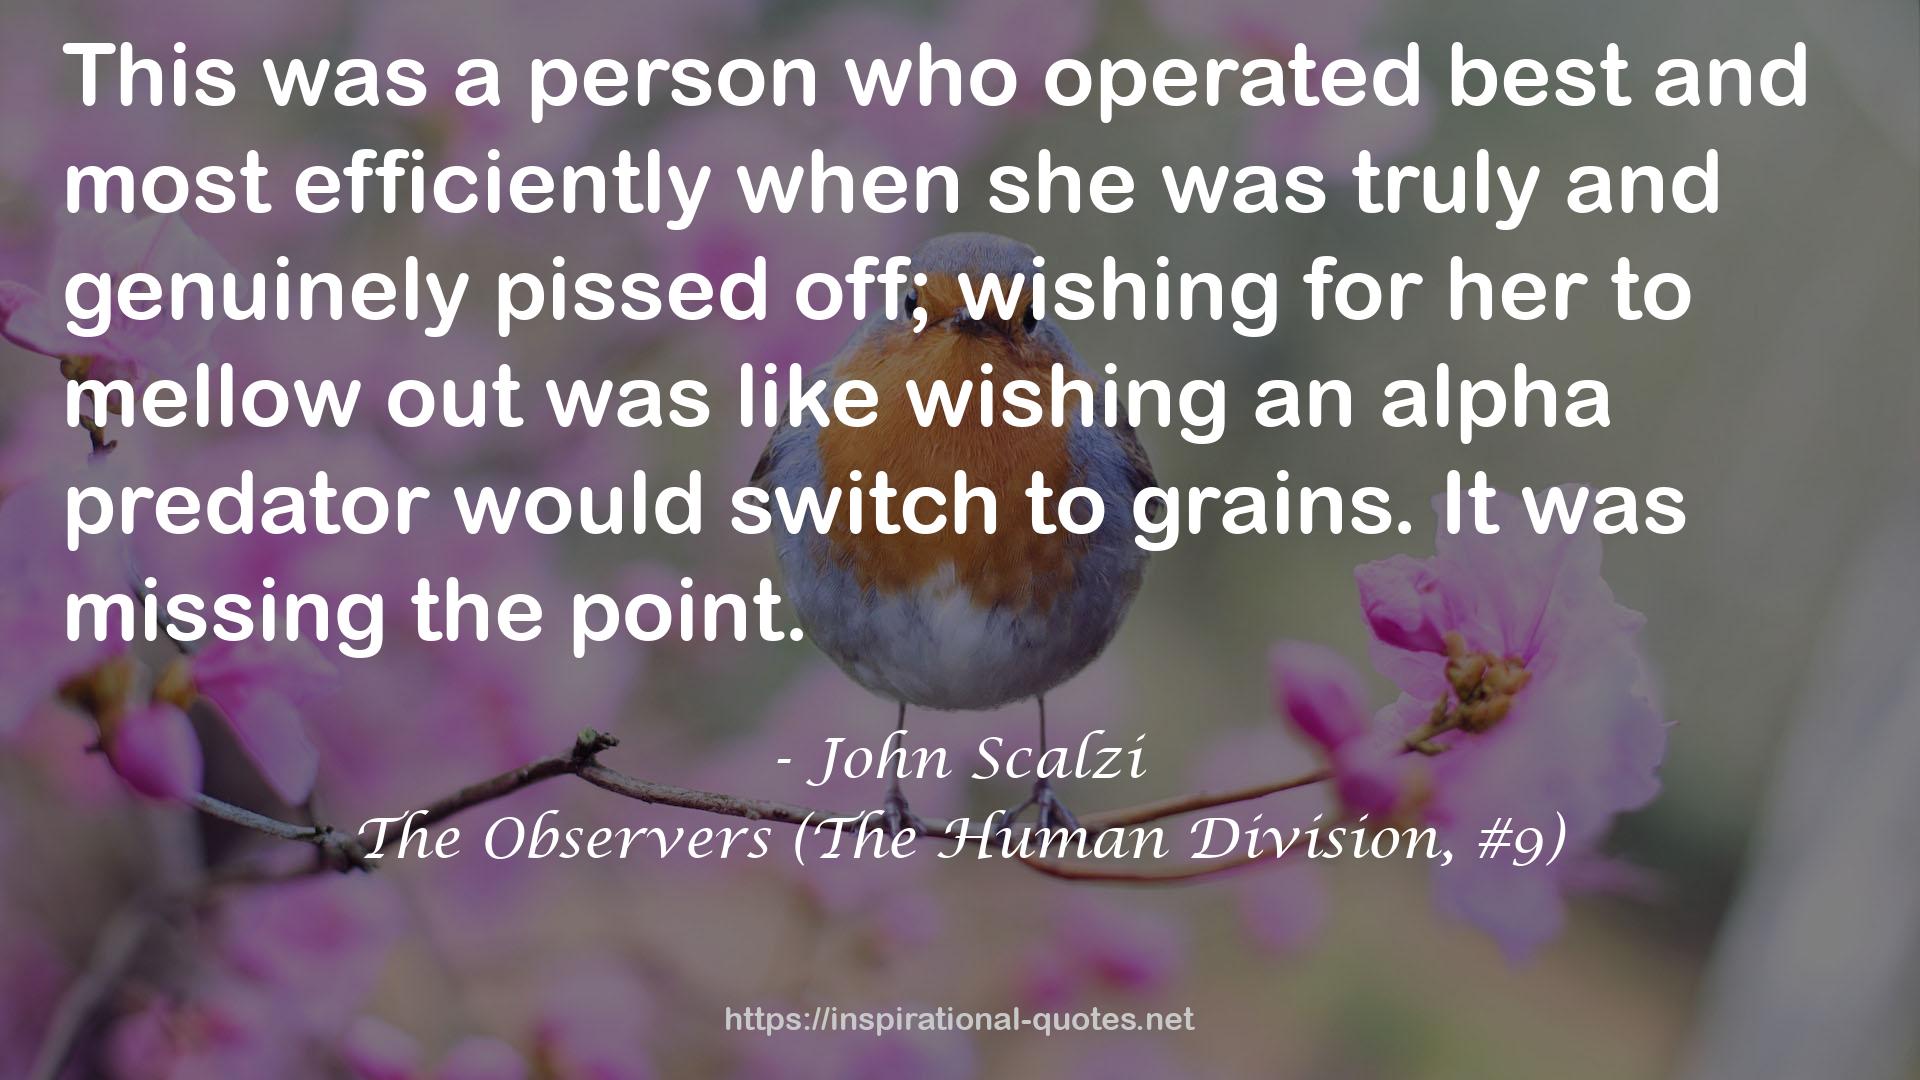 The Observers (The Human Division, #9) QUOTES